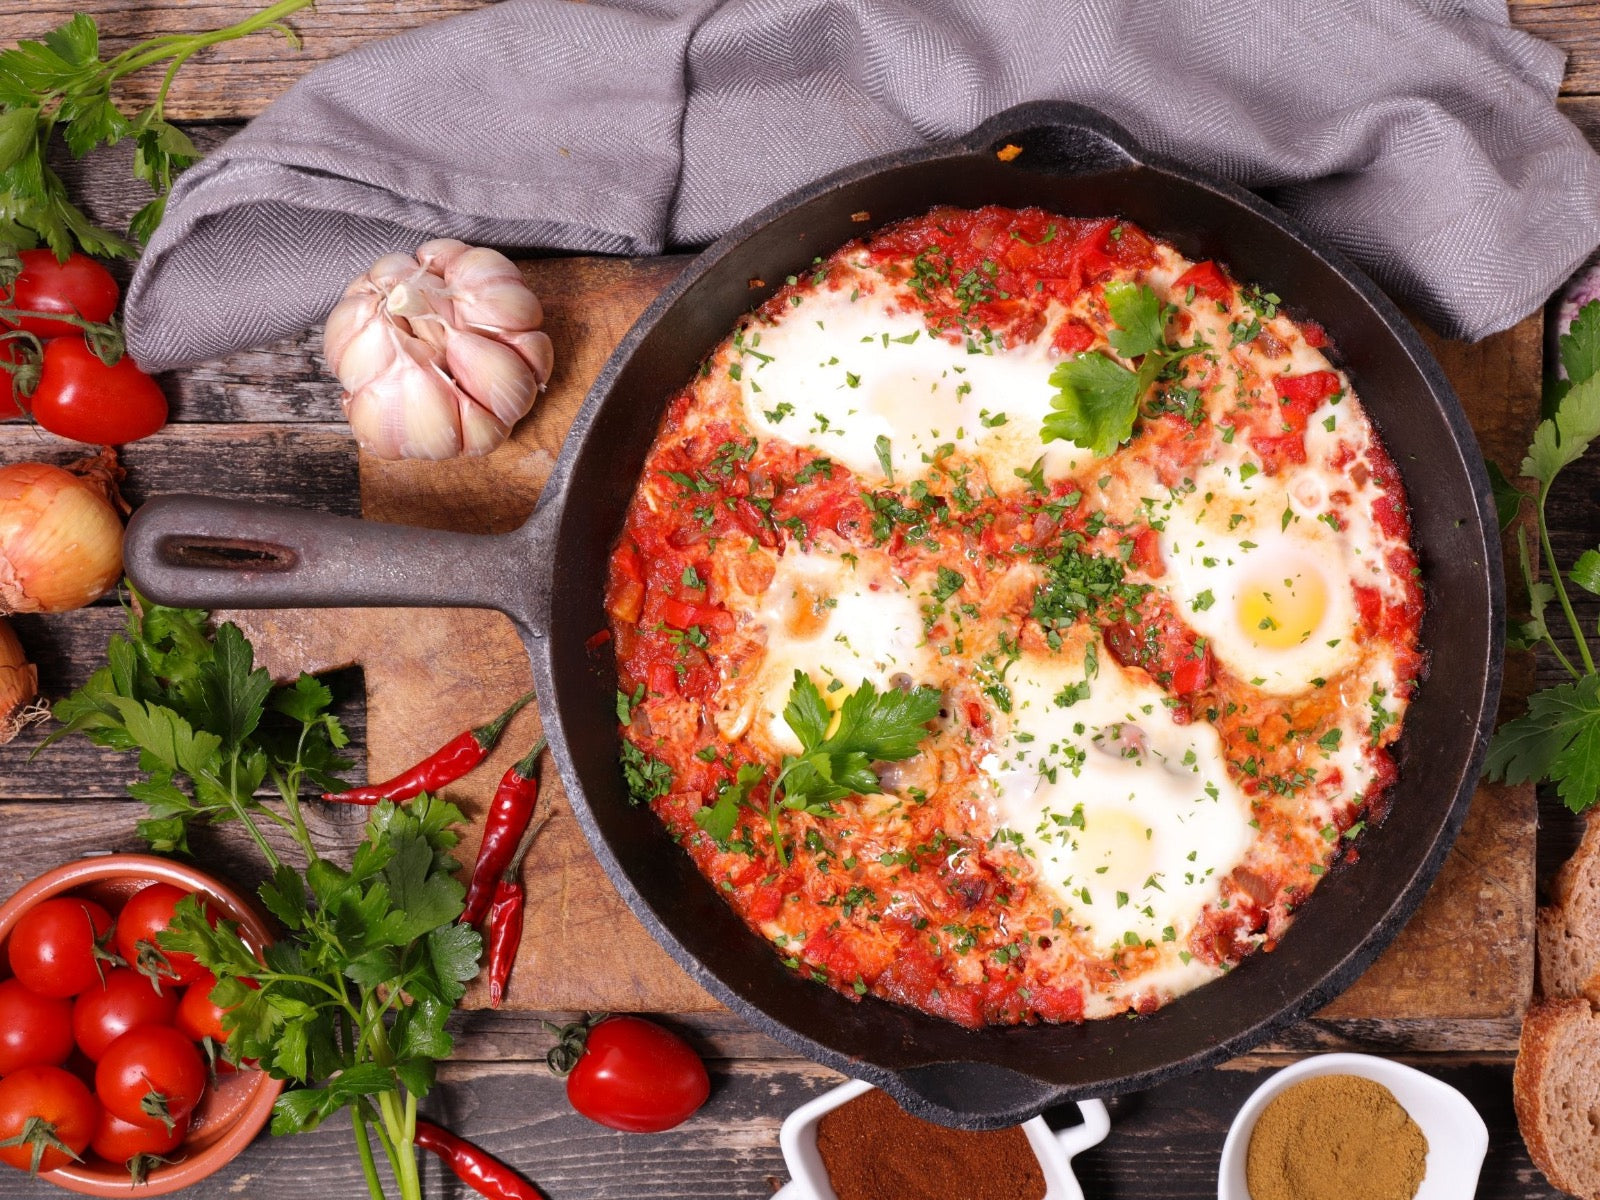 North African Shakshuka Recipe For Any Time Of Day - Beck & Bulow